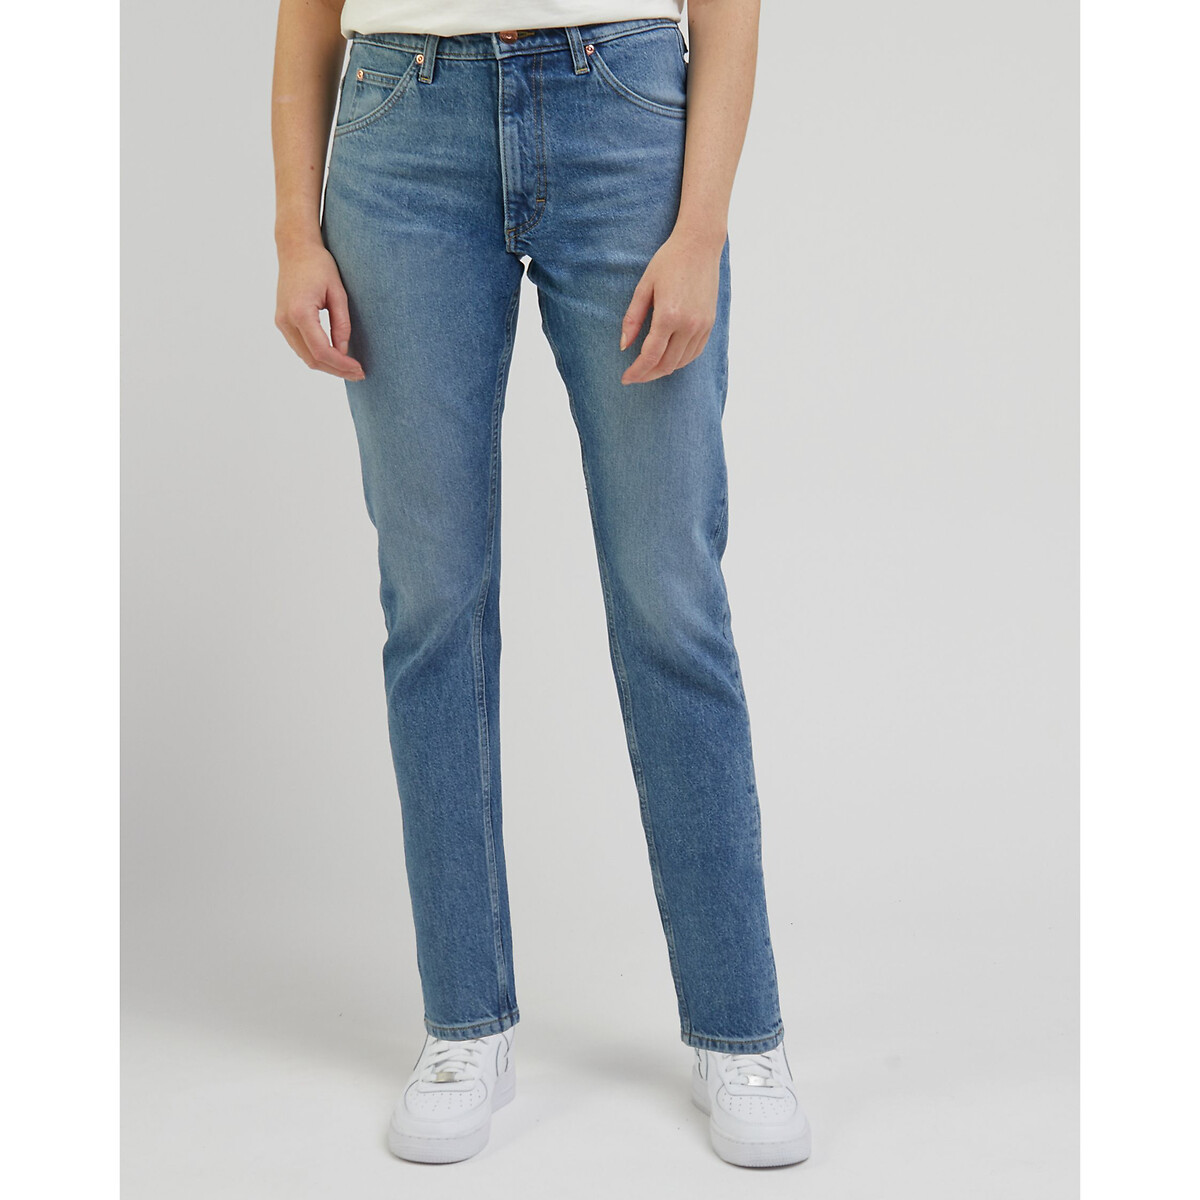 Slim Fit Jeans in Mid Rise, Length 32"